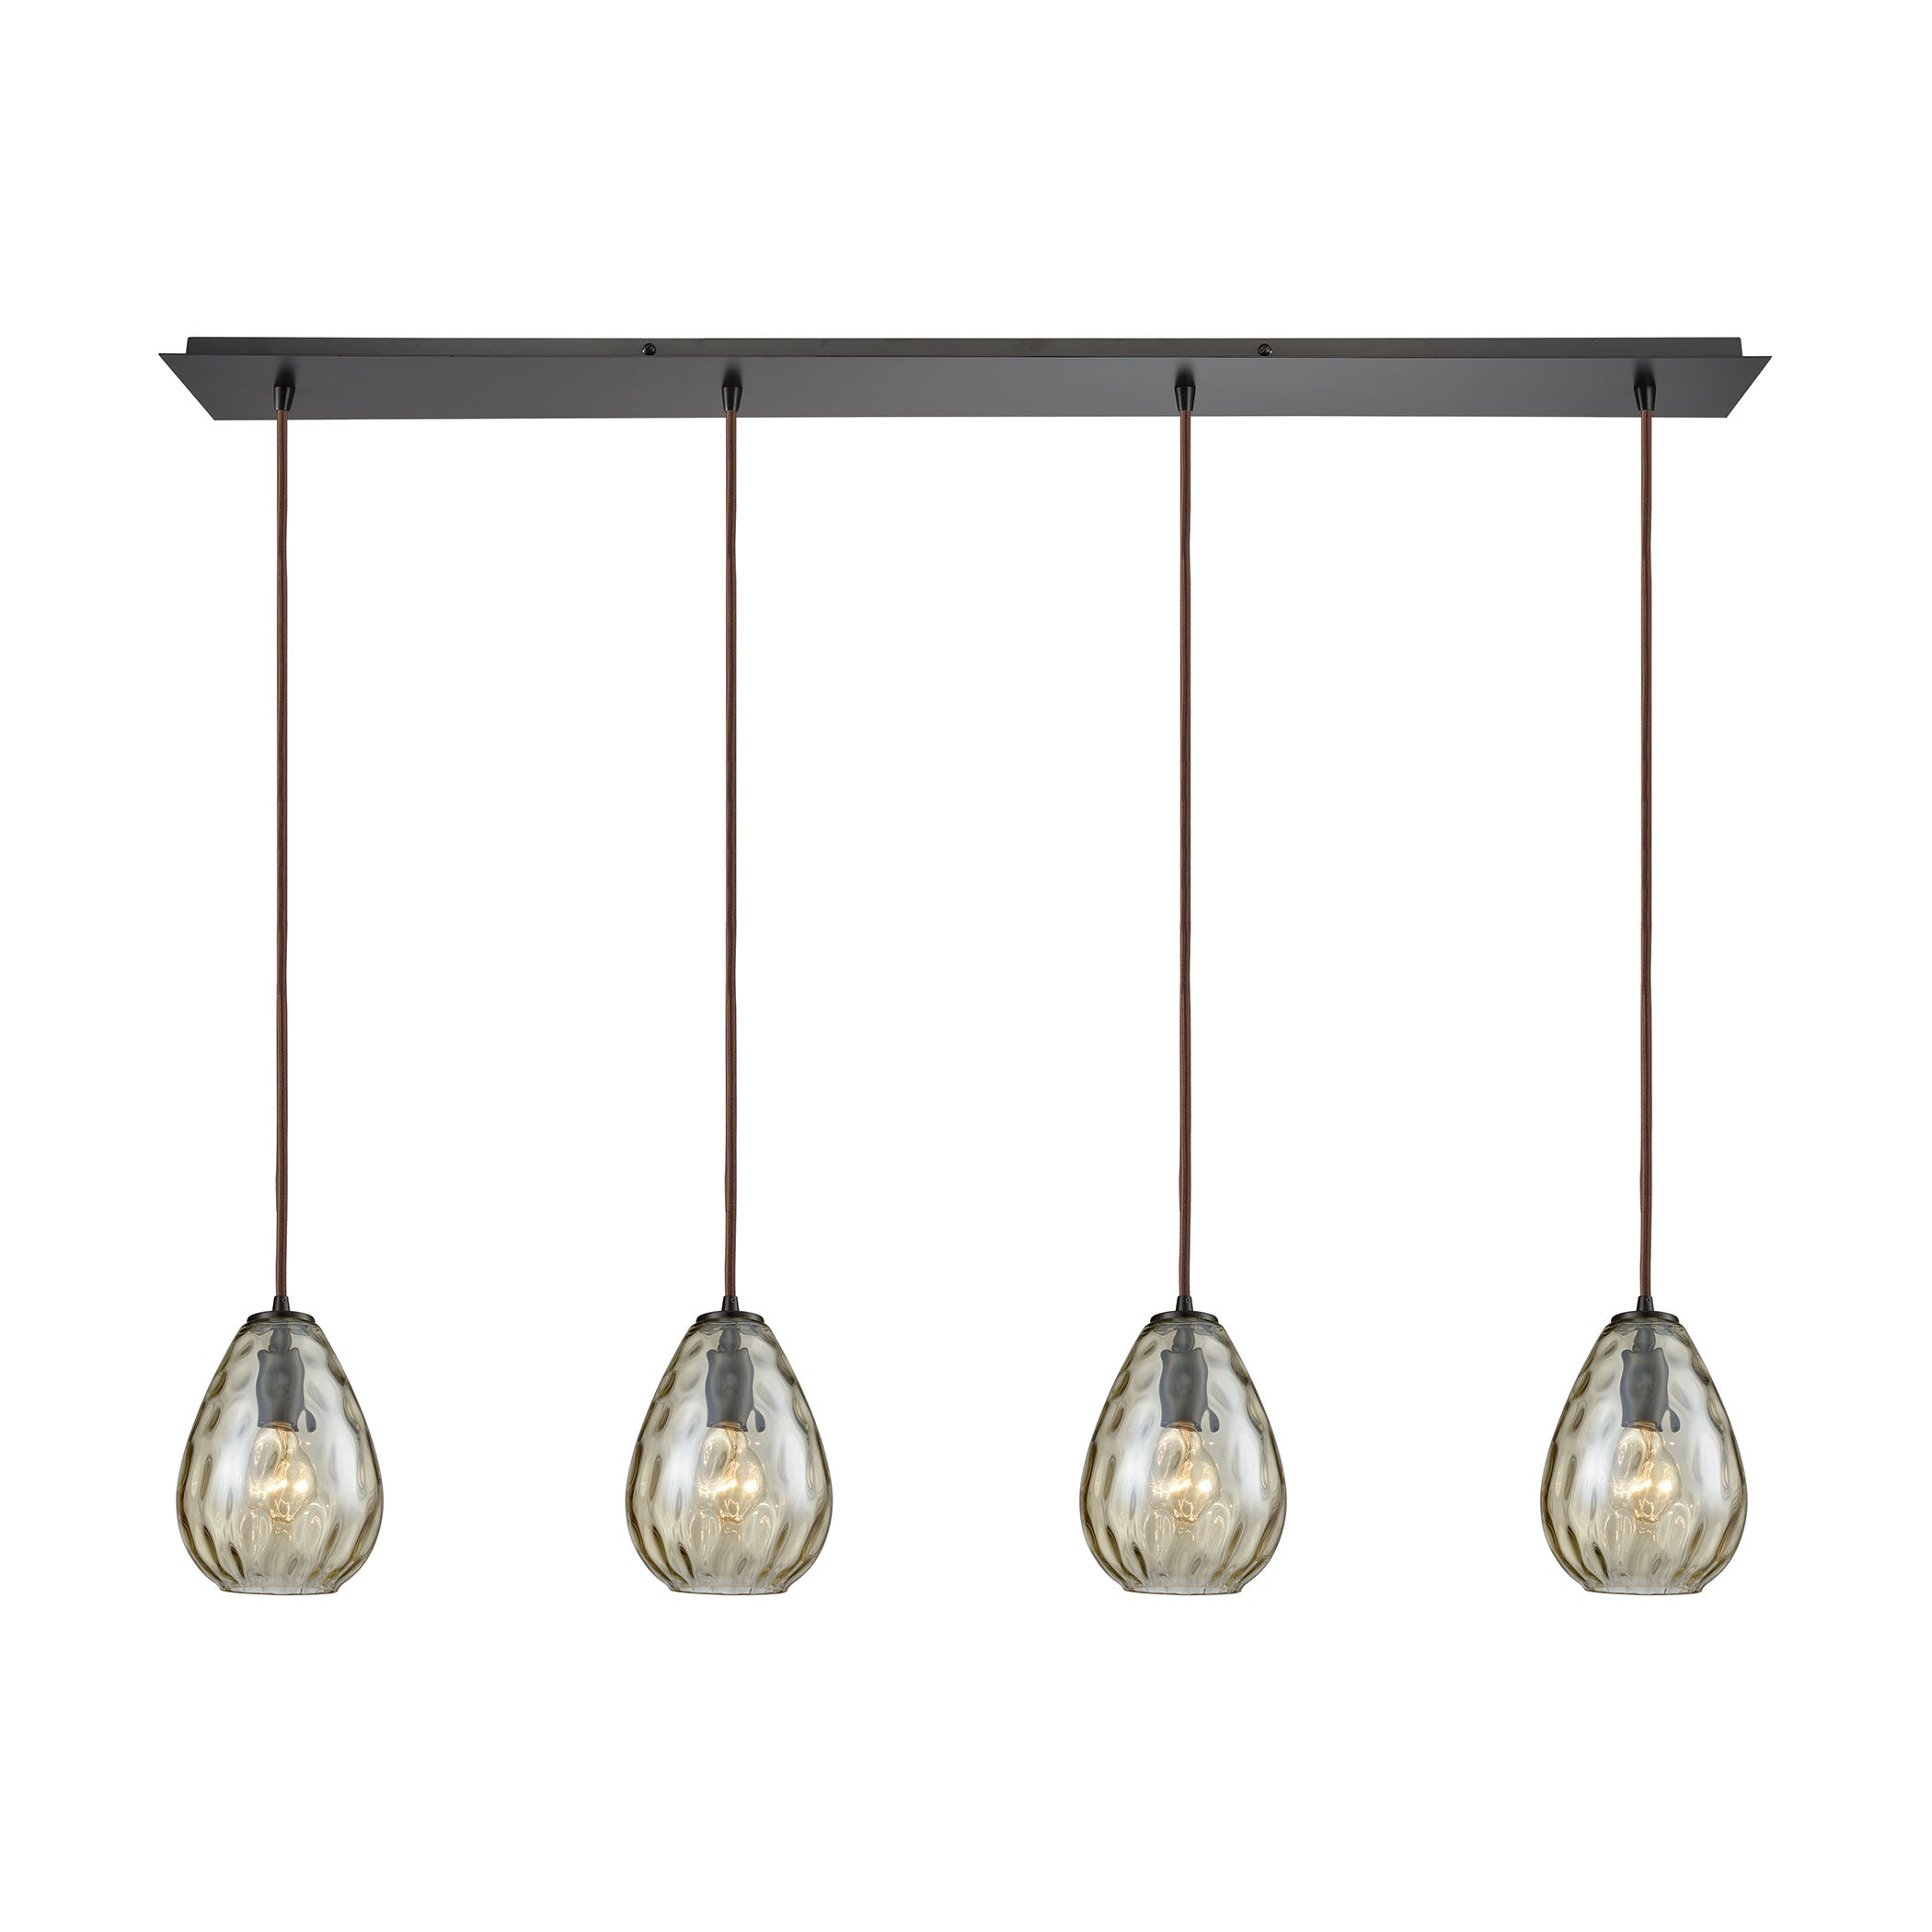 ELK Lighting 10780/4LP Lagoon 4-Light Linear Pendant Fixture in Oil Rubbed Bronze with Champagne-plated Water Glass